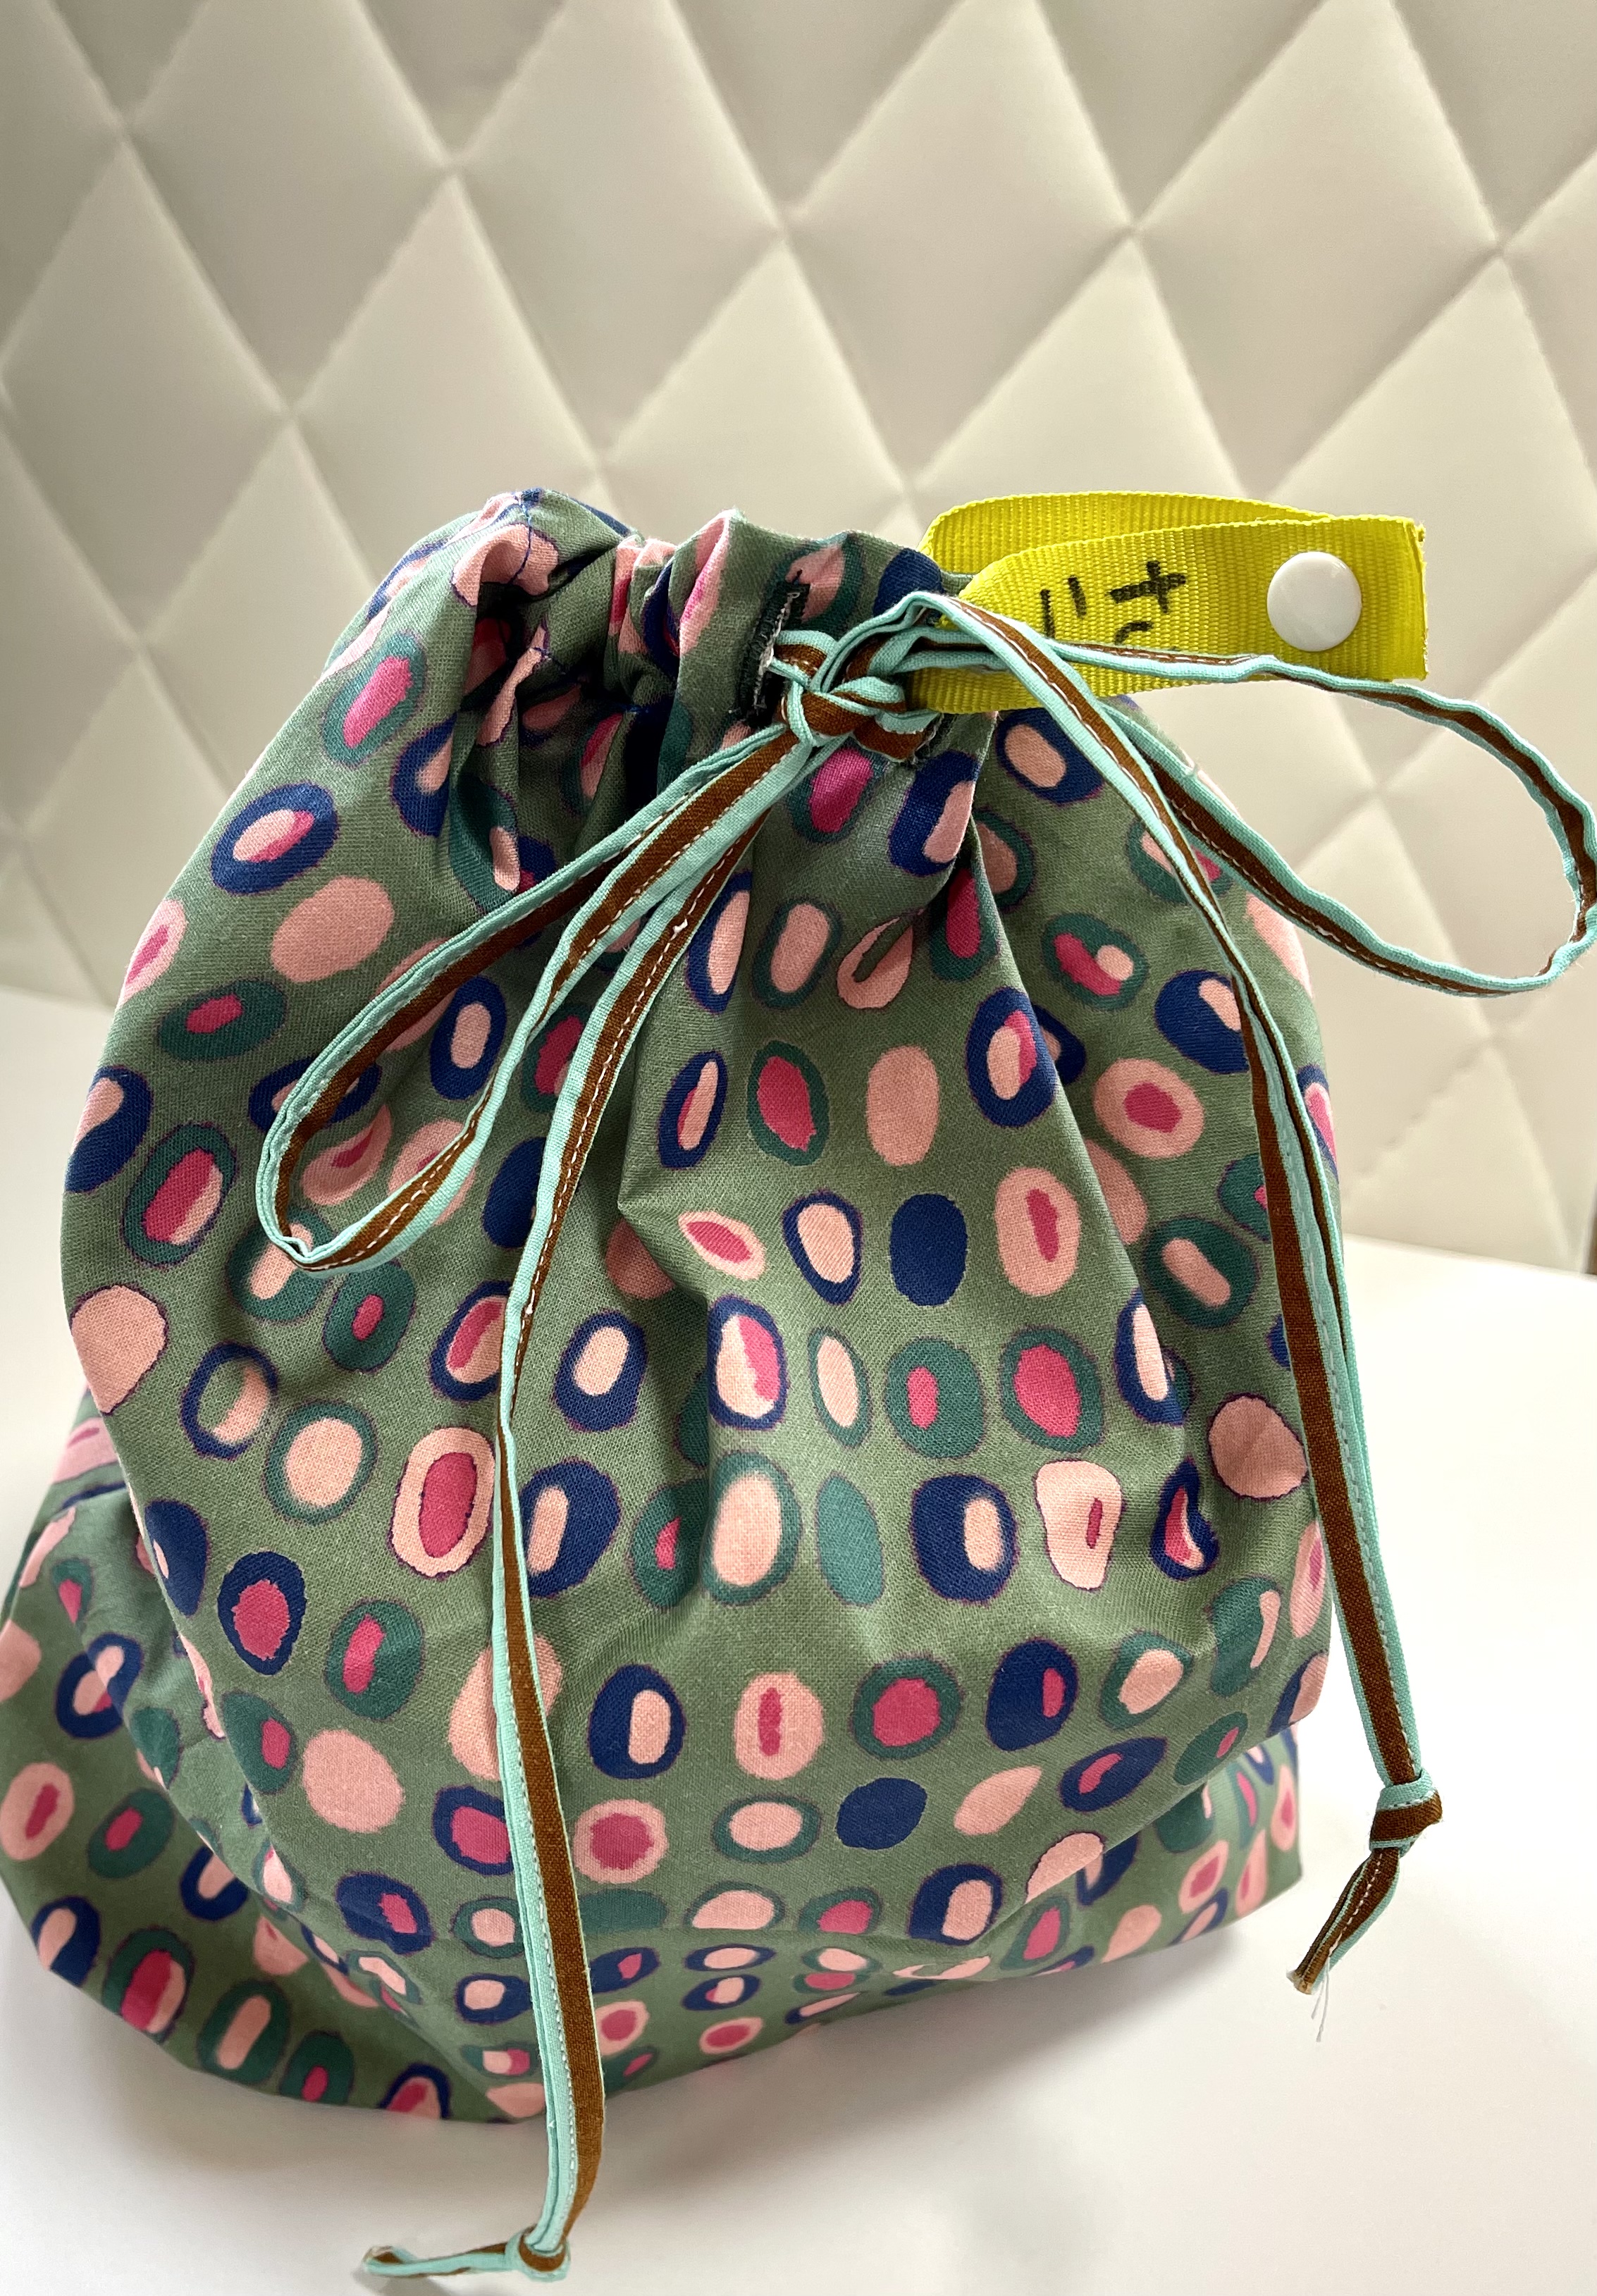 The Rocco Lunch Bag Sewing Pattern, by Seamwork